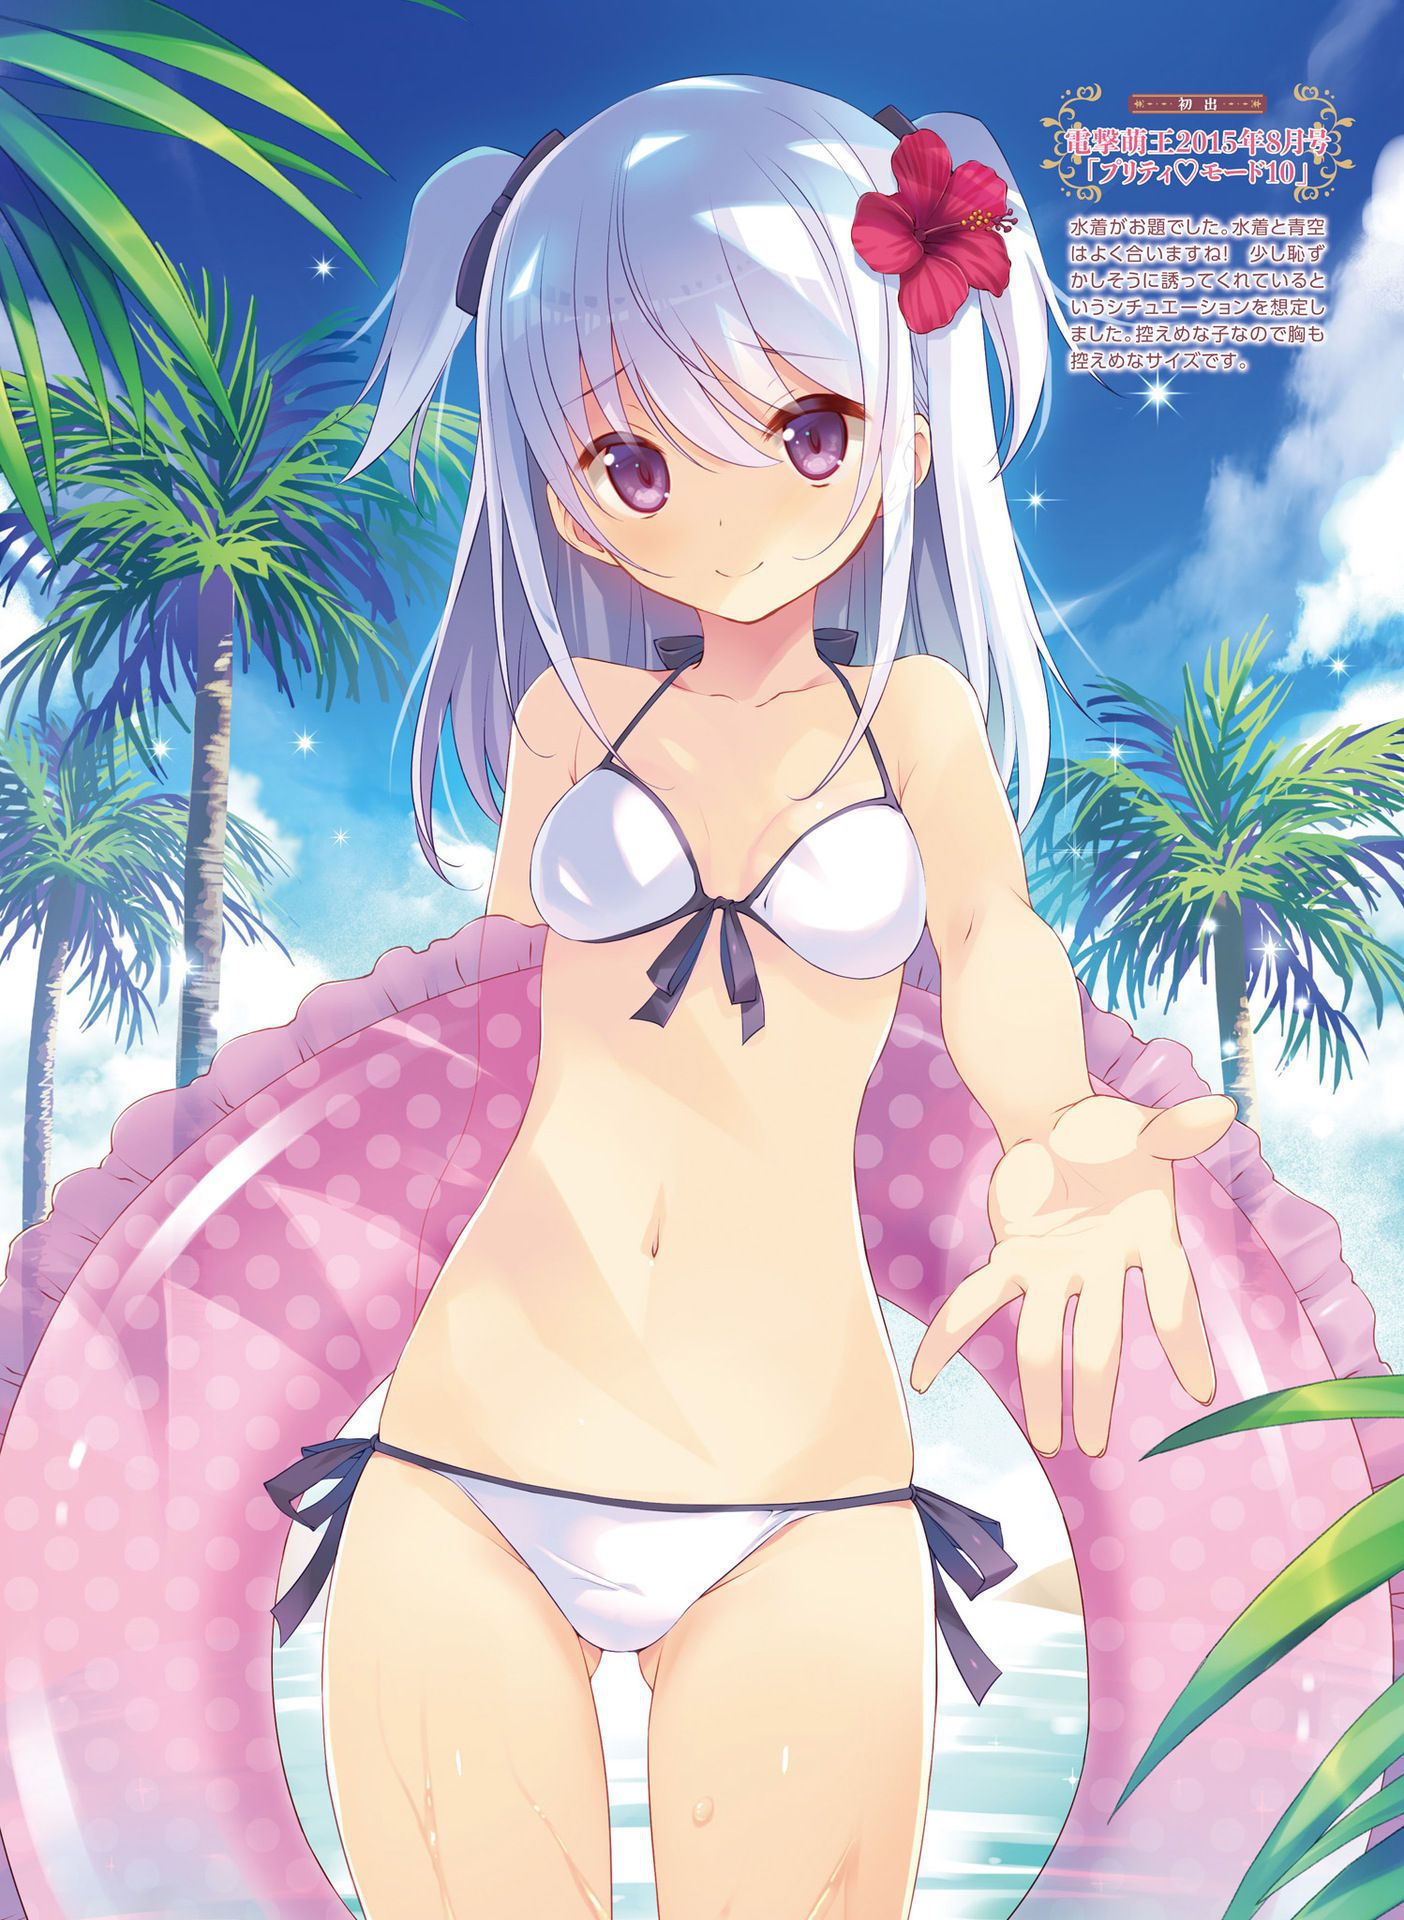 I'm a lewd swimsuit I want to see the image of the swimsuit that cloth area 6